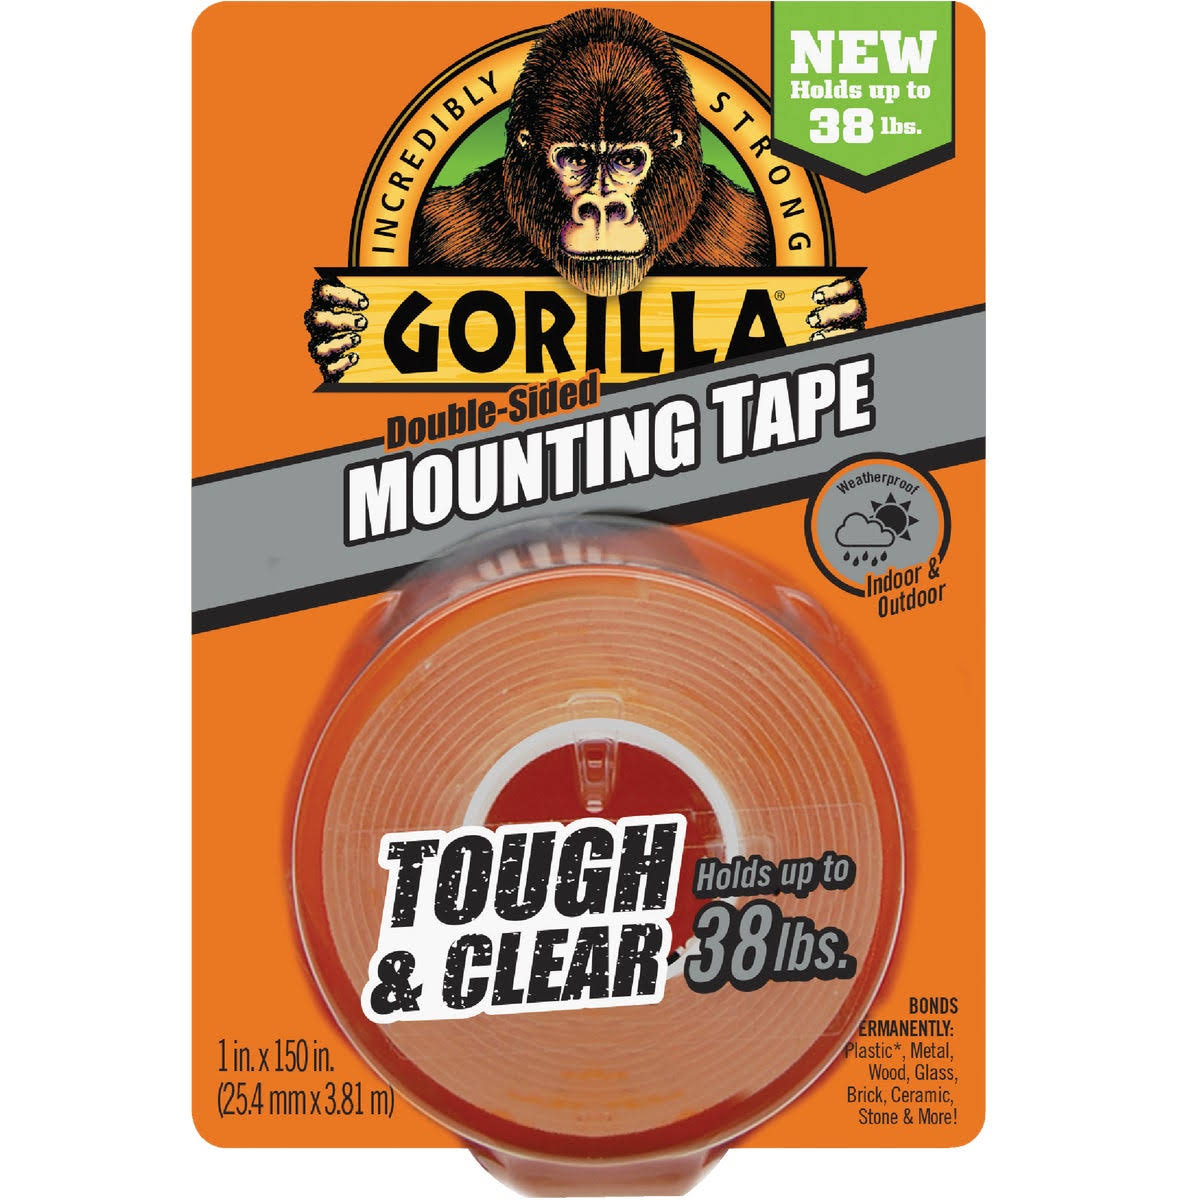 Gorilla 1 In. x 150 In. Tough & Clear Double-Sided Mounting Tape (38 Lb. Capacity) 6036002